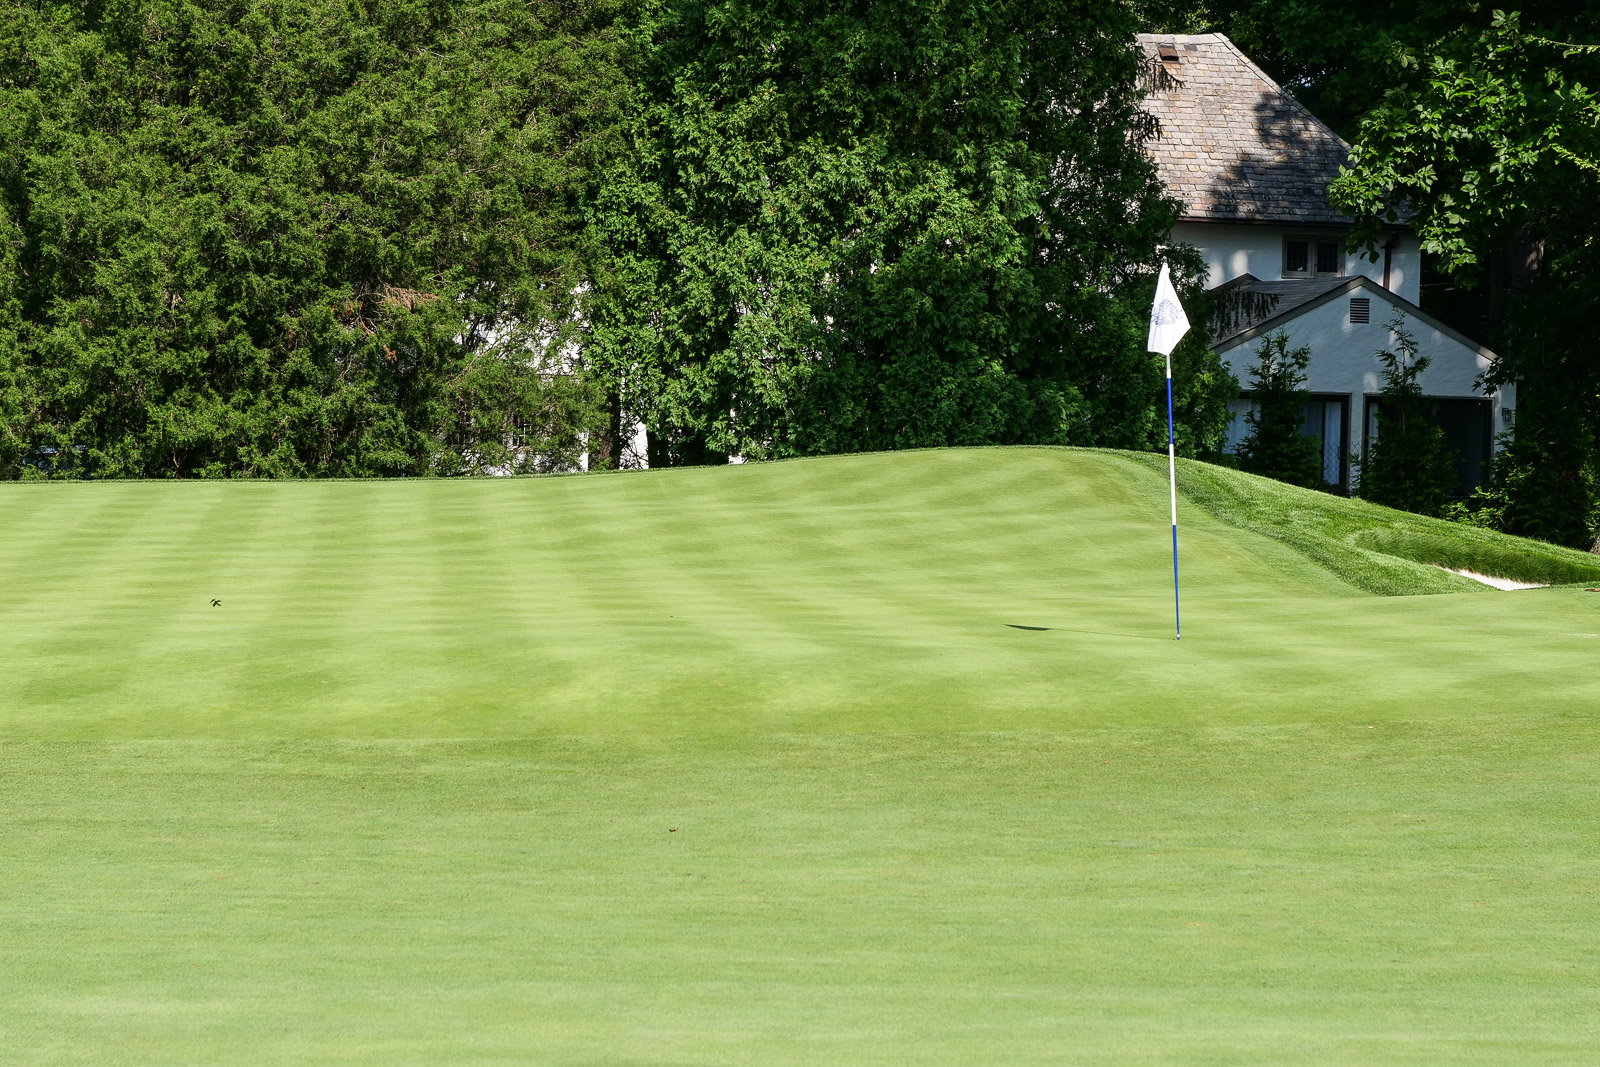 The 4th green is a good example of a typical green at Winged Foot: interesting.